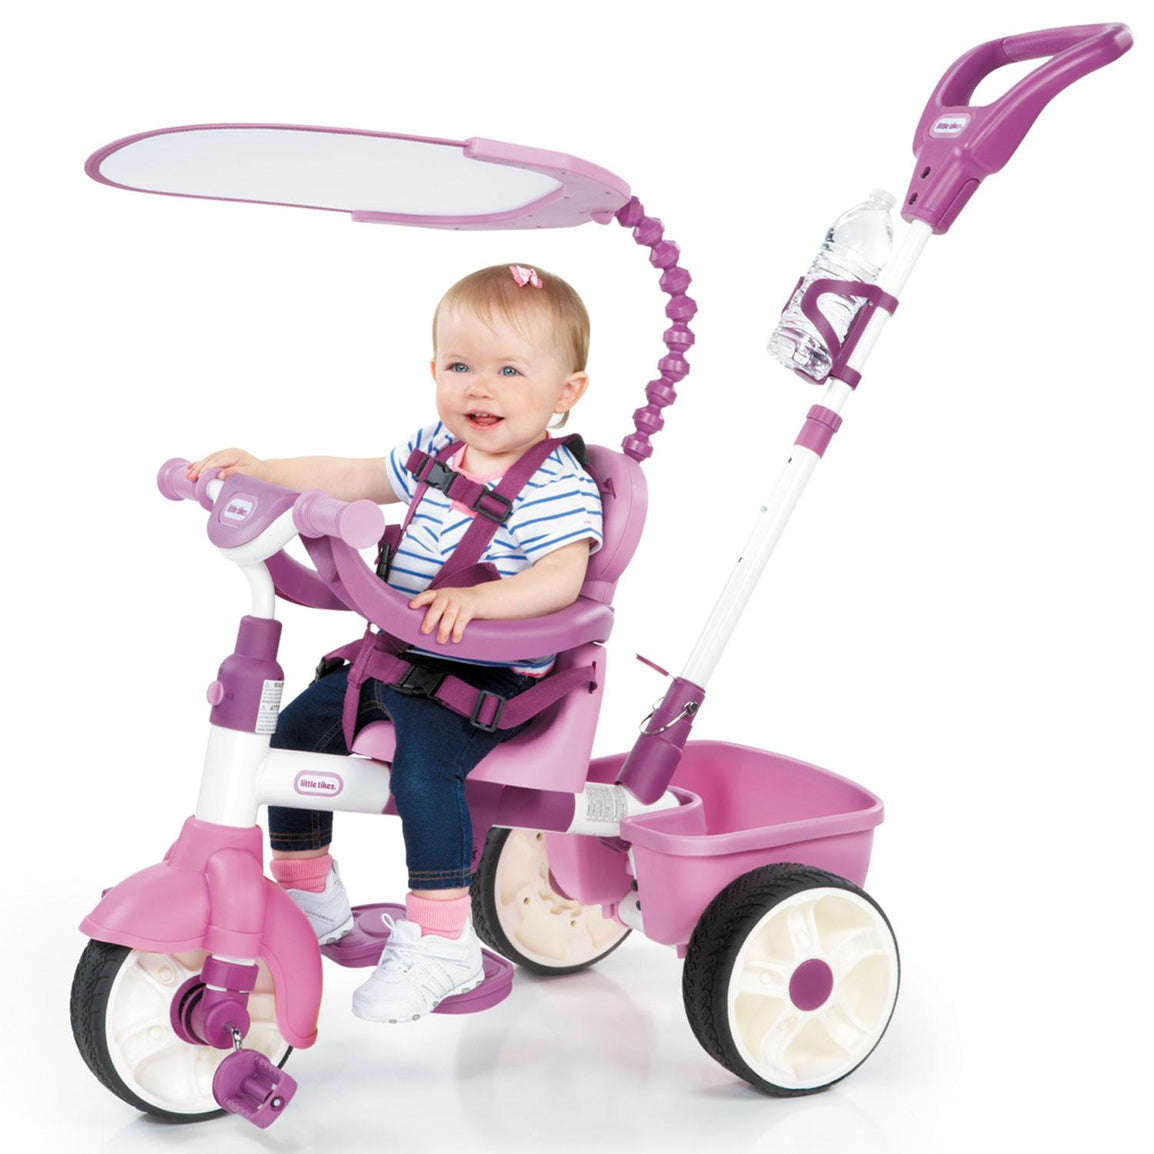 4-in-1 Basic Edition Trike - Pink - Official Little Tikes Website